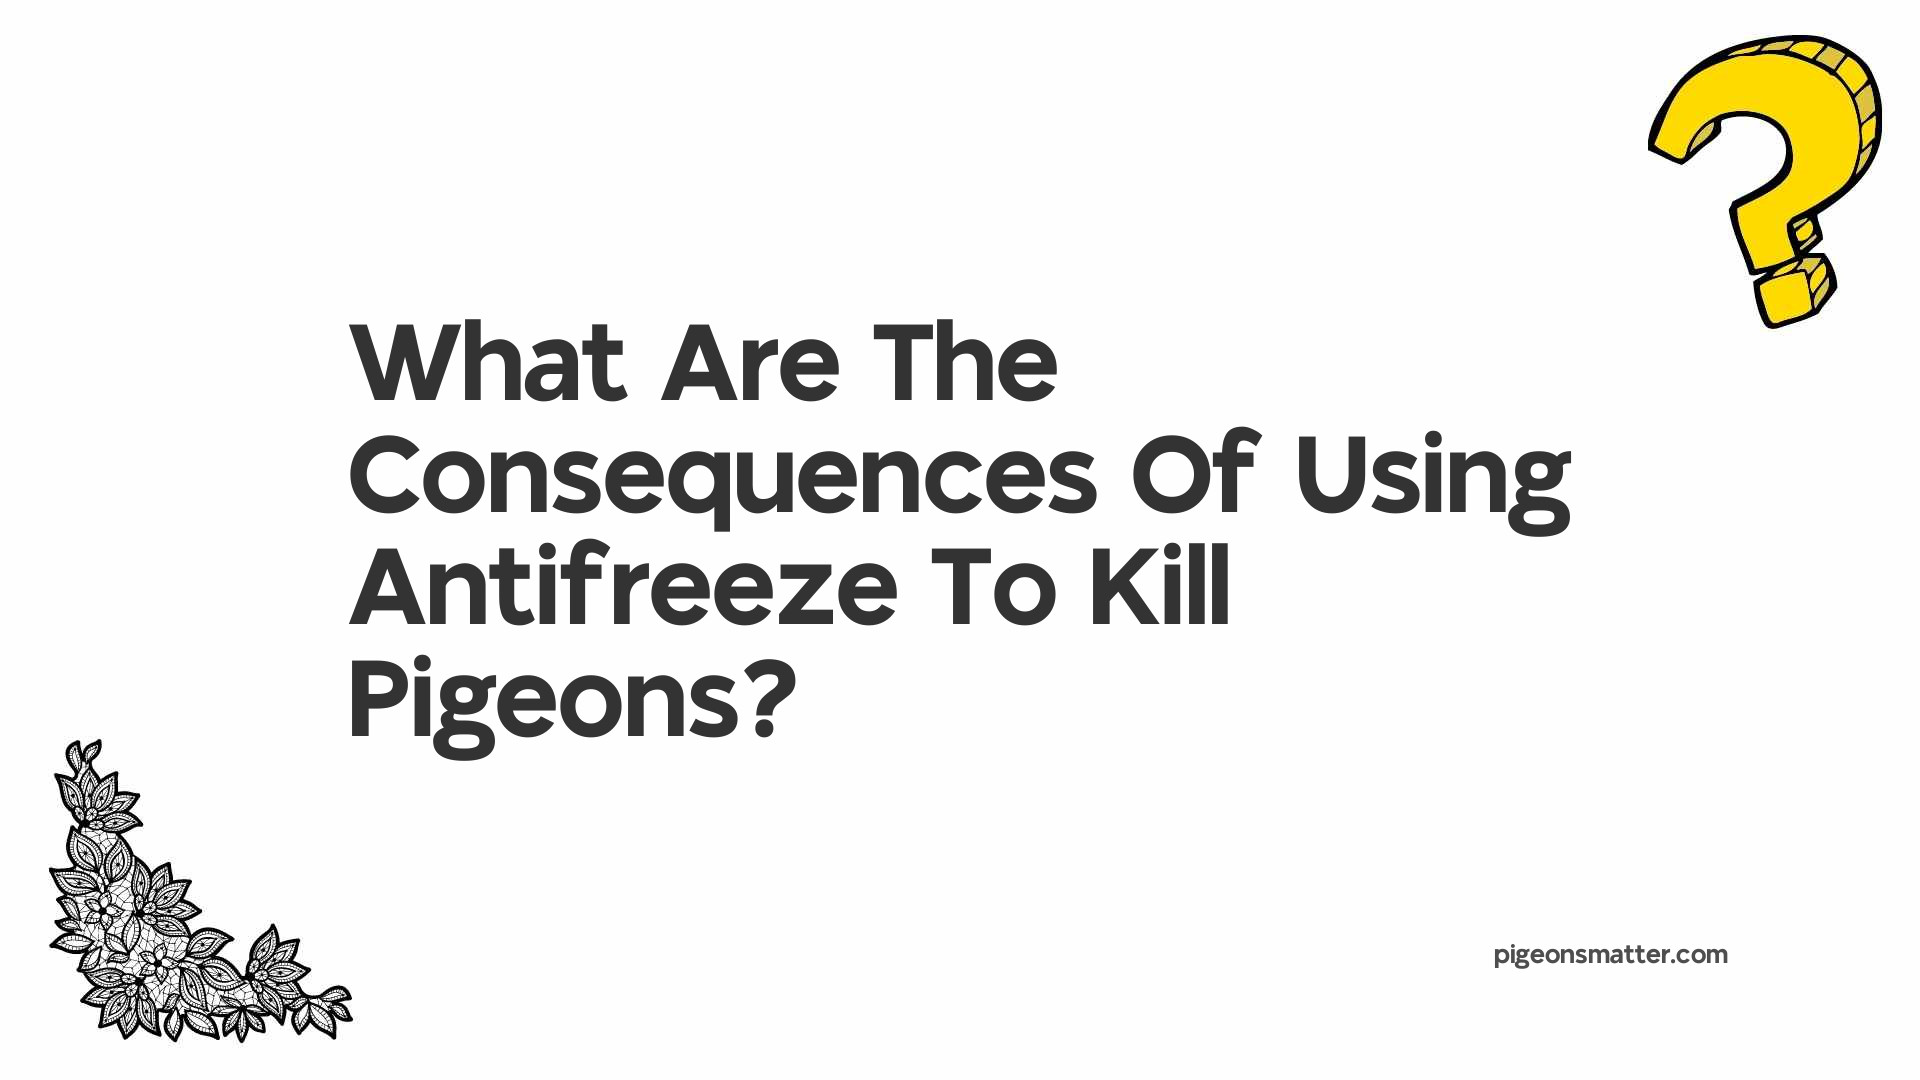 What Are The Consequences Of Using Antifreeze To Kill Pigeons?